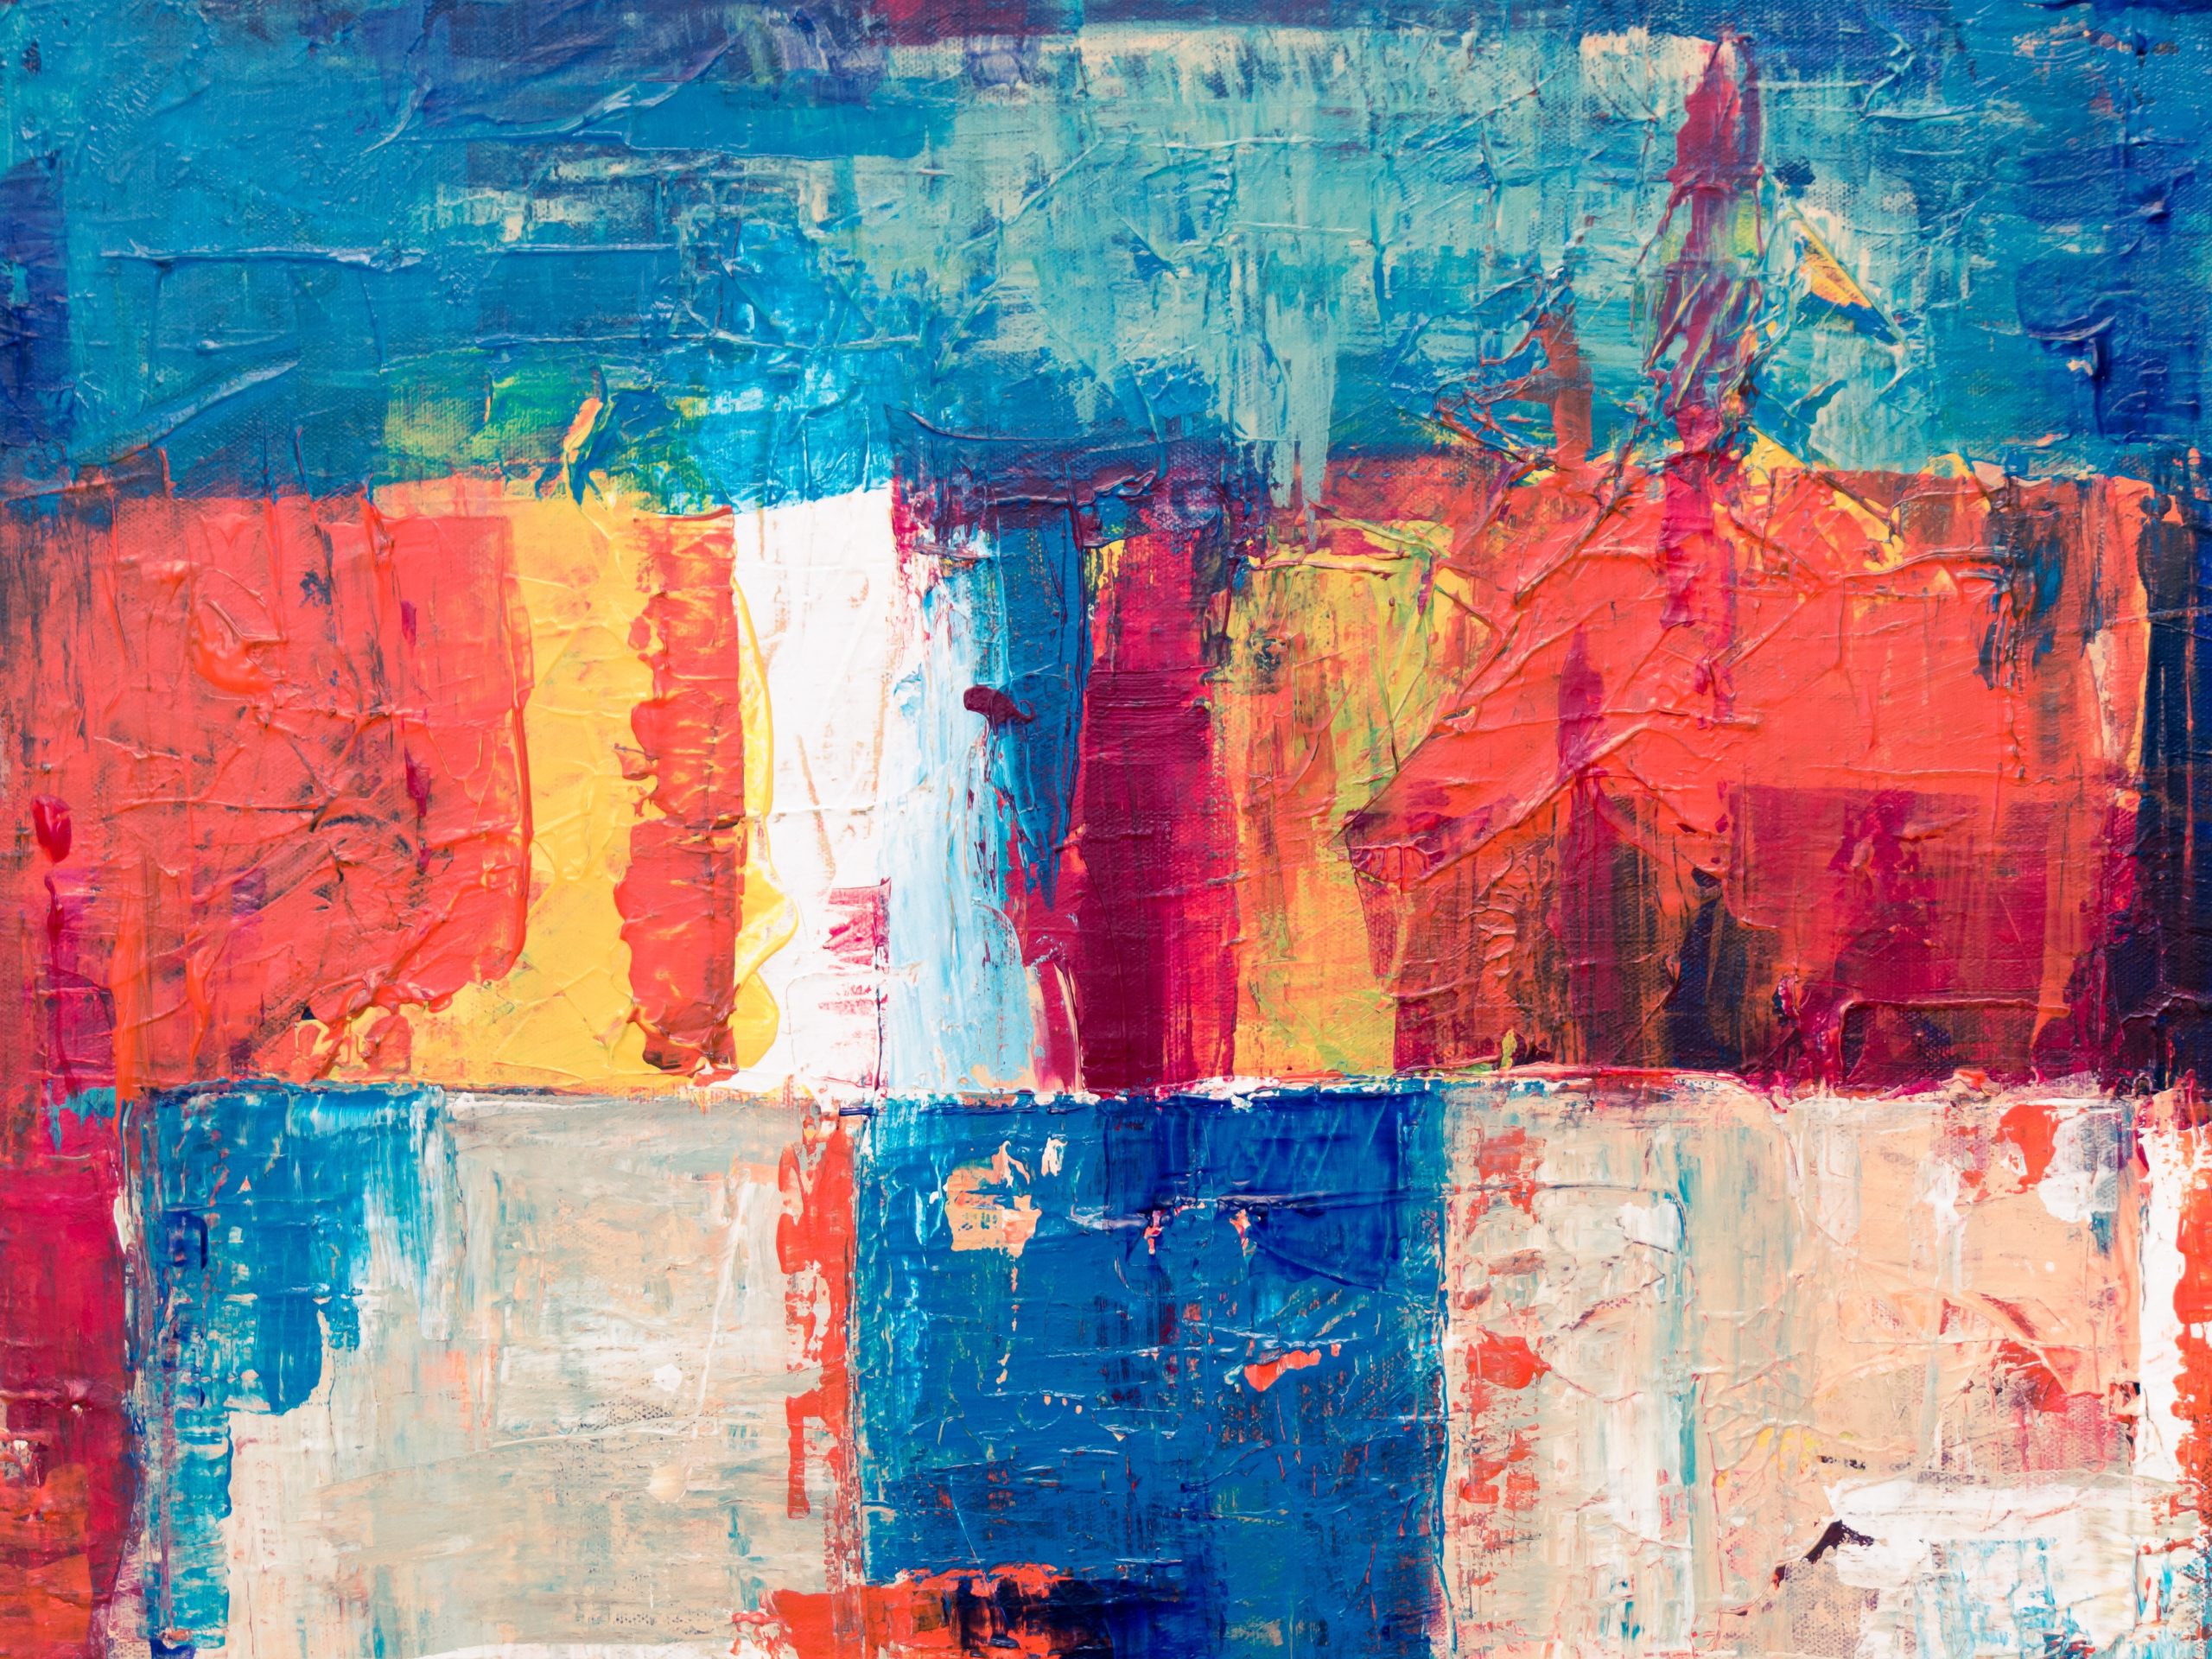 Colorful abstract painting by Steve Johnson on Unsplash